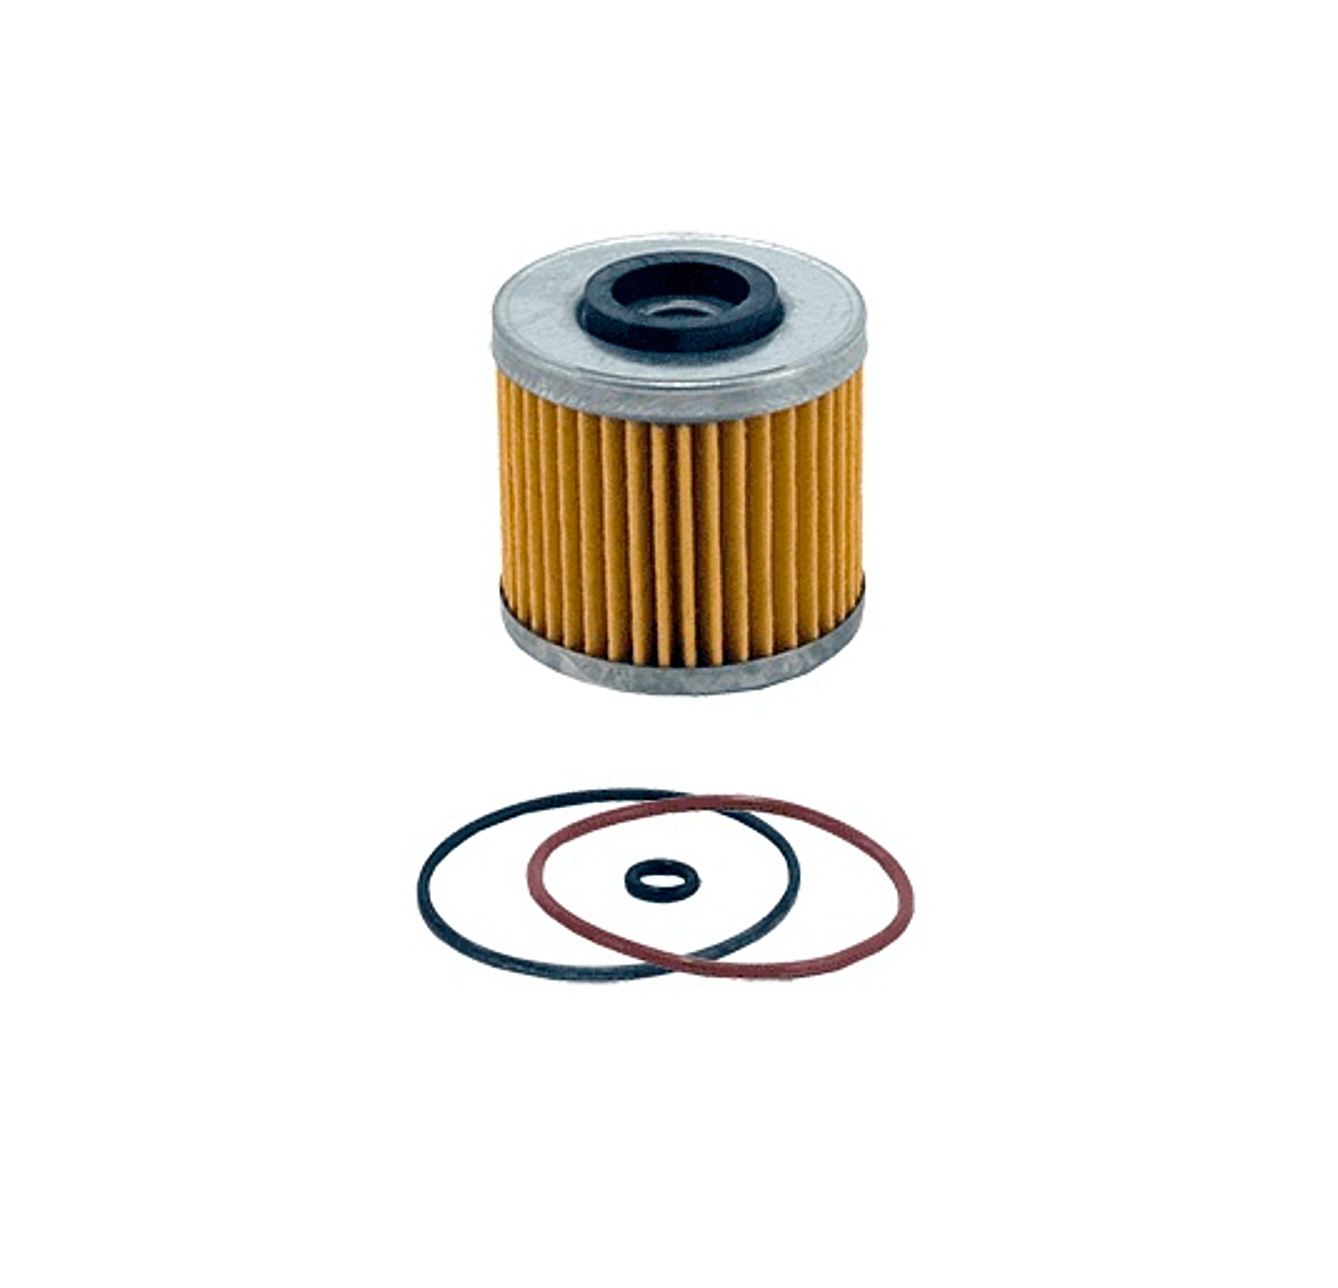 Wix Filters 24935 Oil Filter, Cartridge, 2.252 in Tall, 2.170 in Diameter, 17 Micron, Yamaha Motorcycles, Each